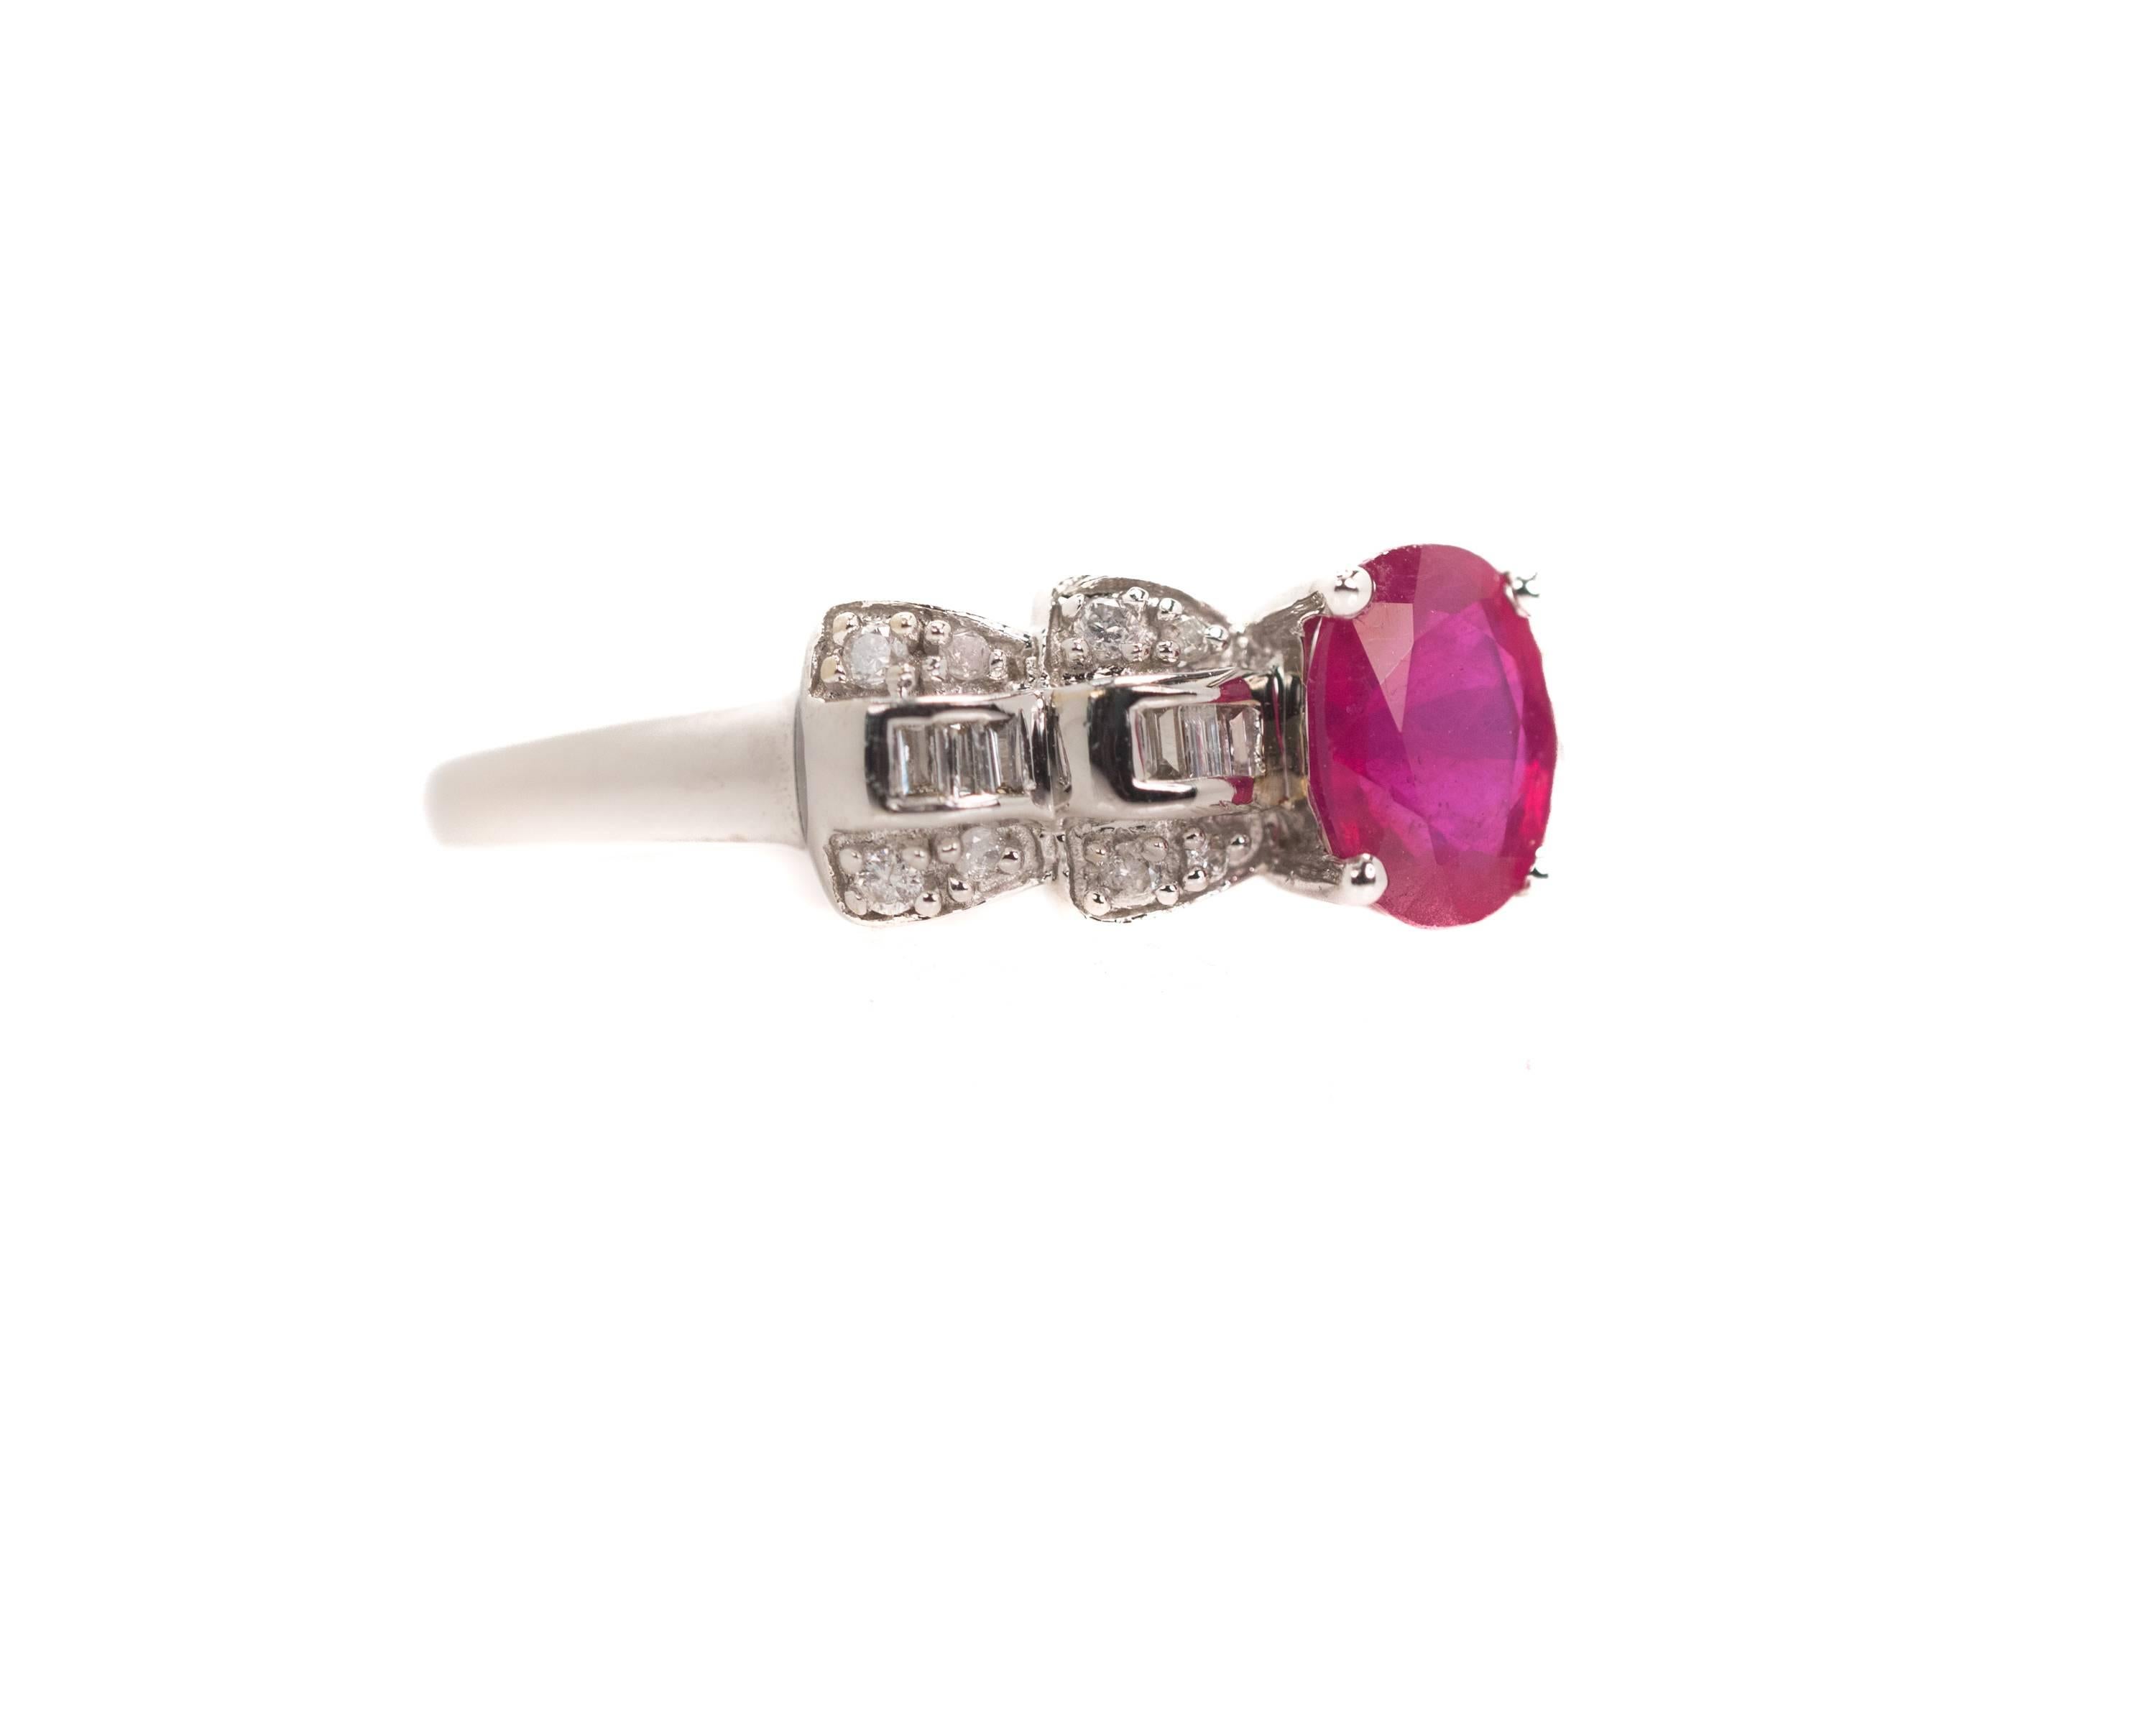 1980s Cocktail Ring - 14K White Gold, Ruby, Diamonds

Features a 0.50 Carat Oval cut Red Ruby Center Stone. The oval Ruby is flanked by Baguette Diamonds. Round Brilliant Diamonds are prong set above and below the Baguette Diamonds. The ring shank